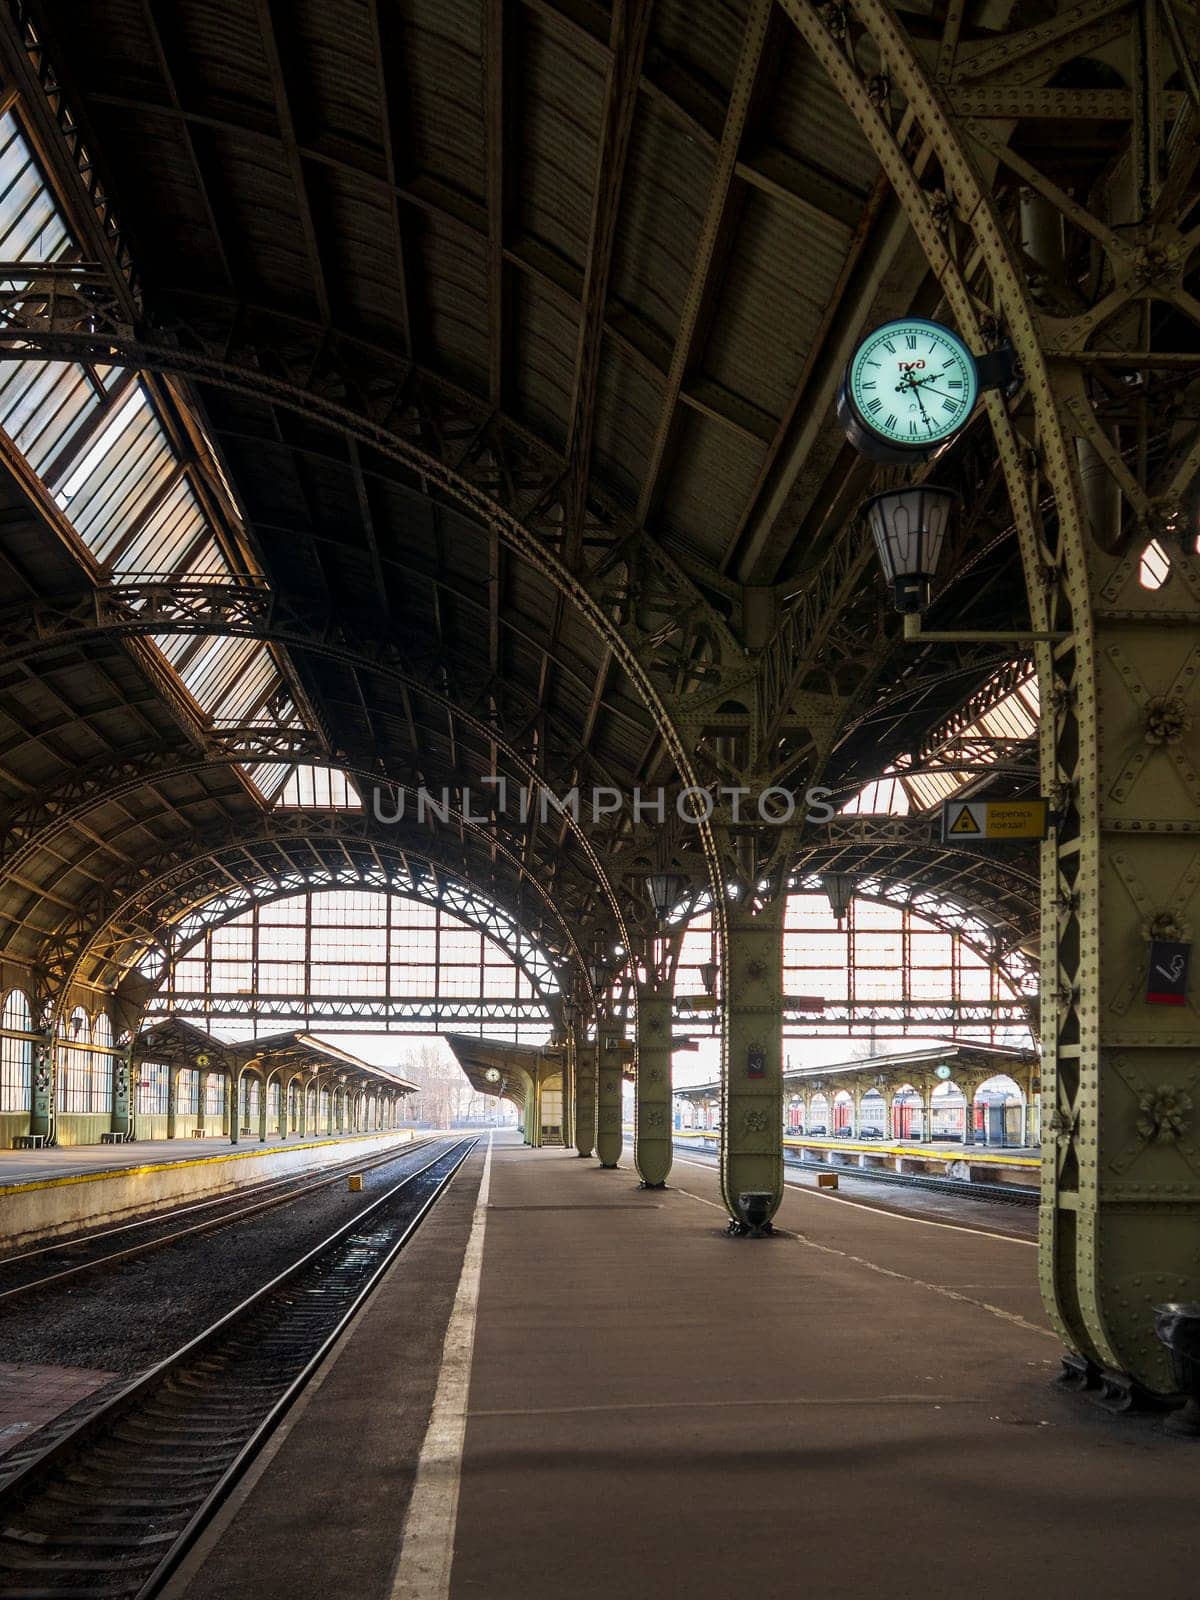 St. Petersburg, Vitebsk railway station in an early sunny morning, platform with a clock by Andre1ns